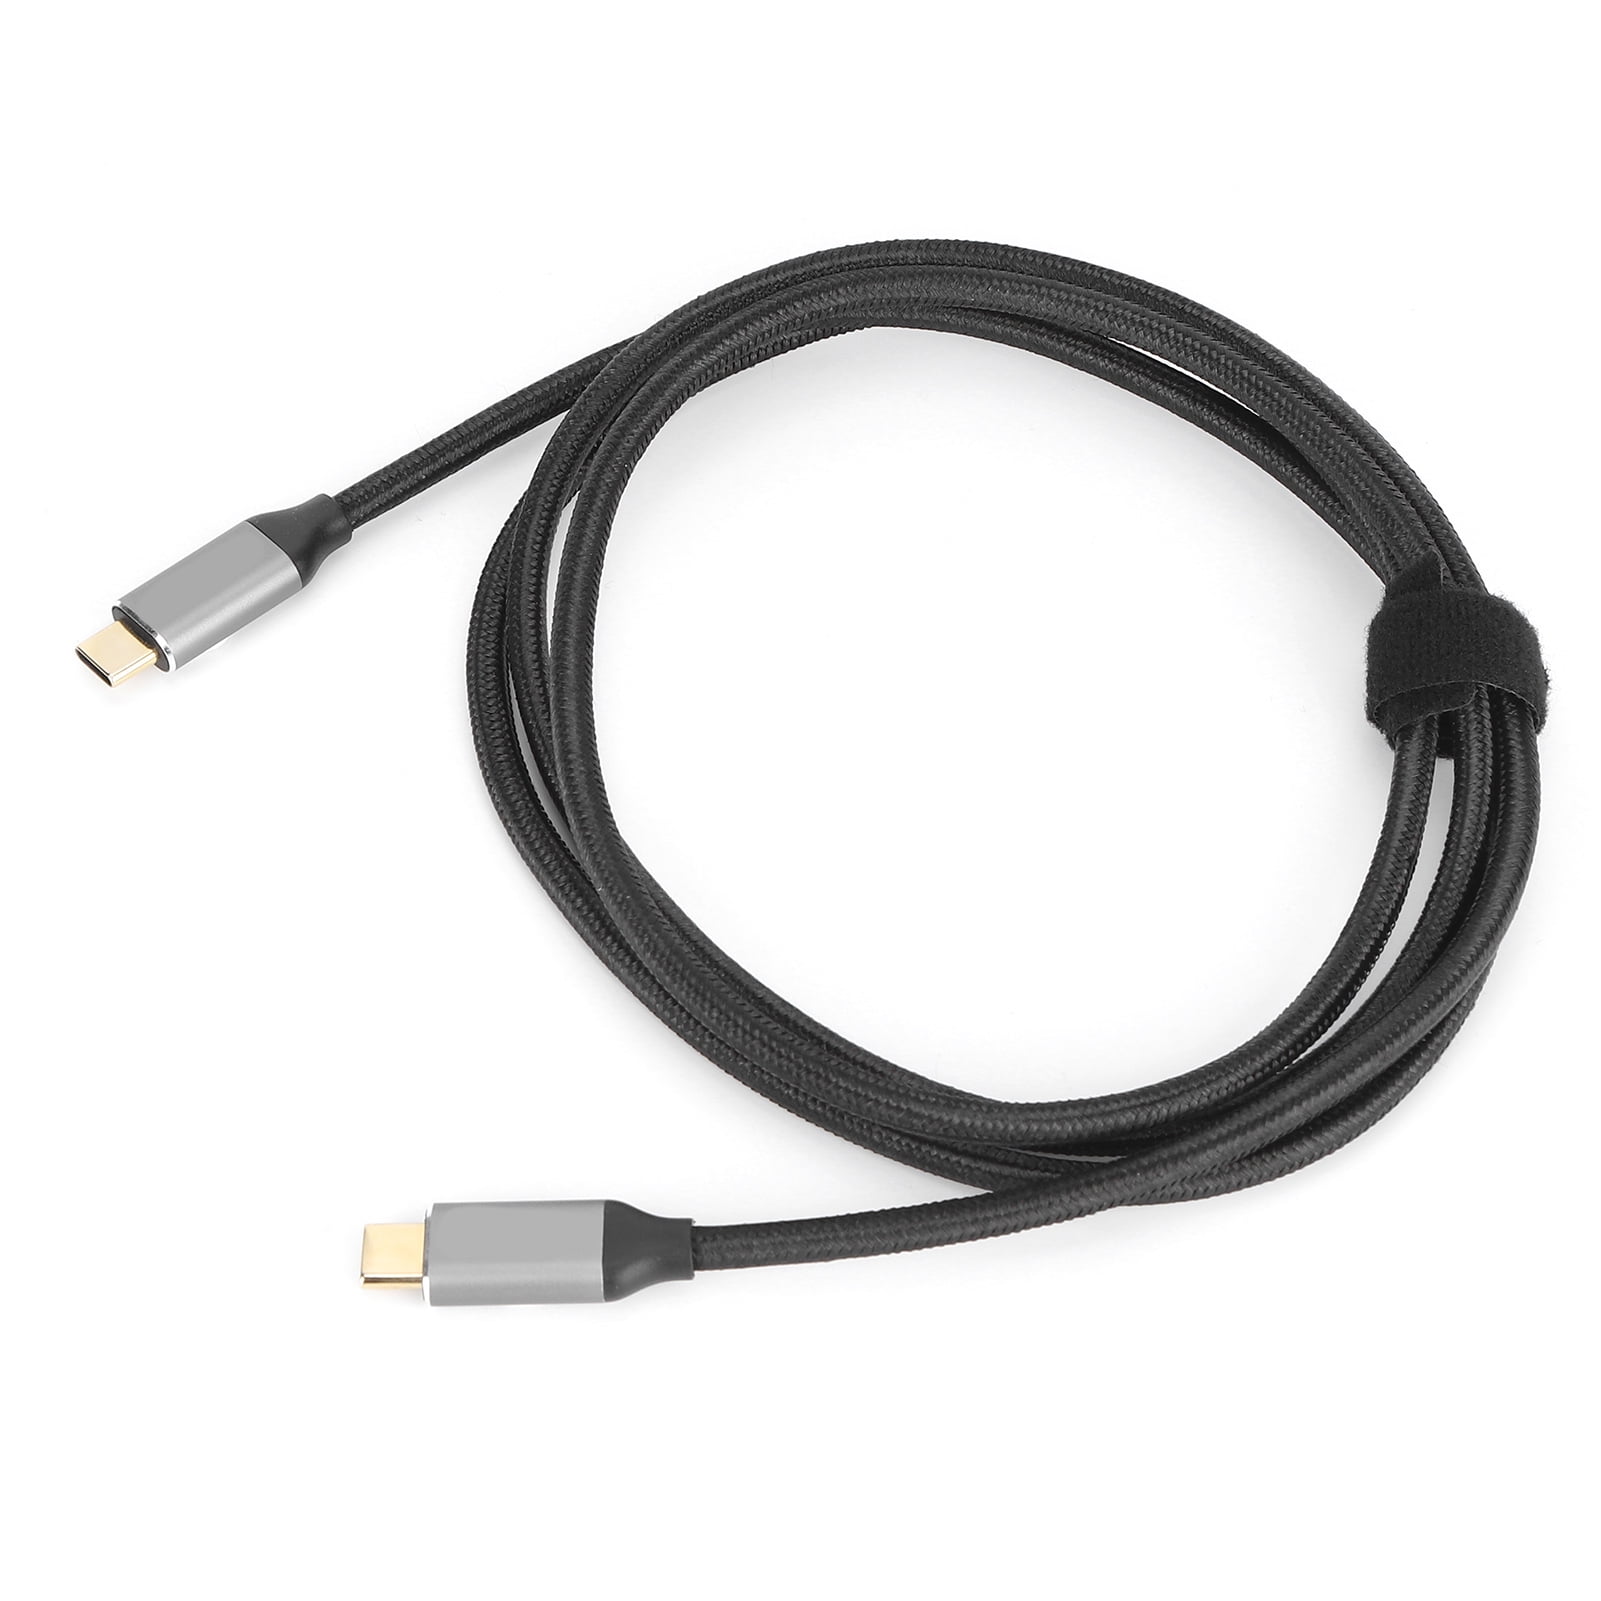 USB 3.1 Type C Multi Charging Cable, USB 2.0 with 1x Micro USB and 1x USB C  Connectors Compact Charger Cable Cord 30CM